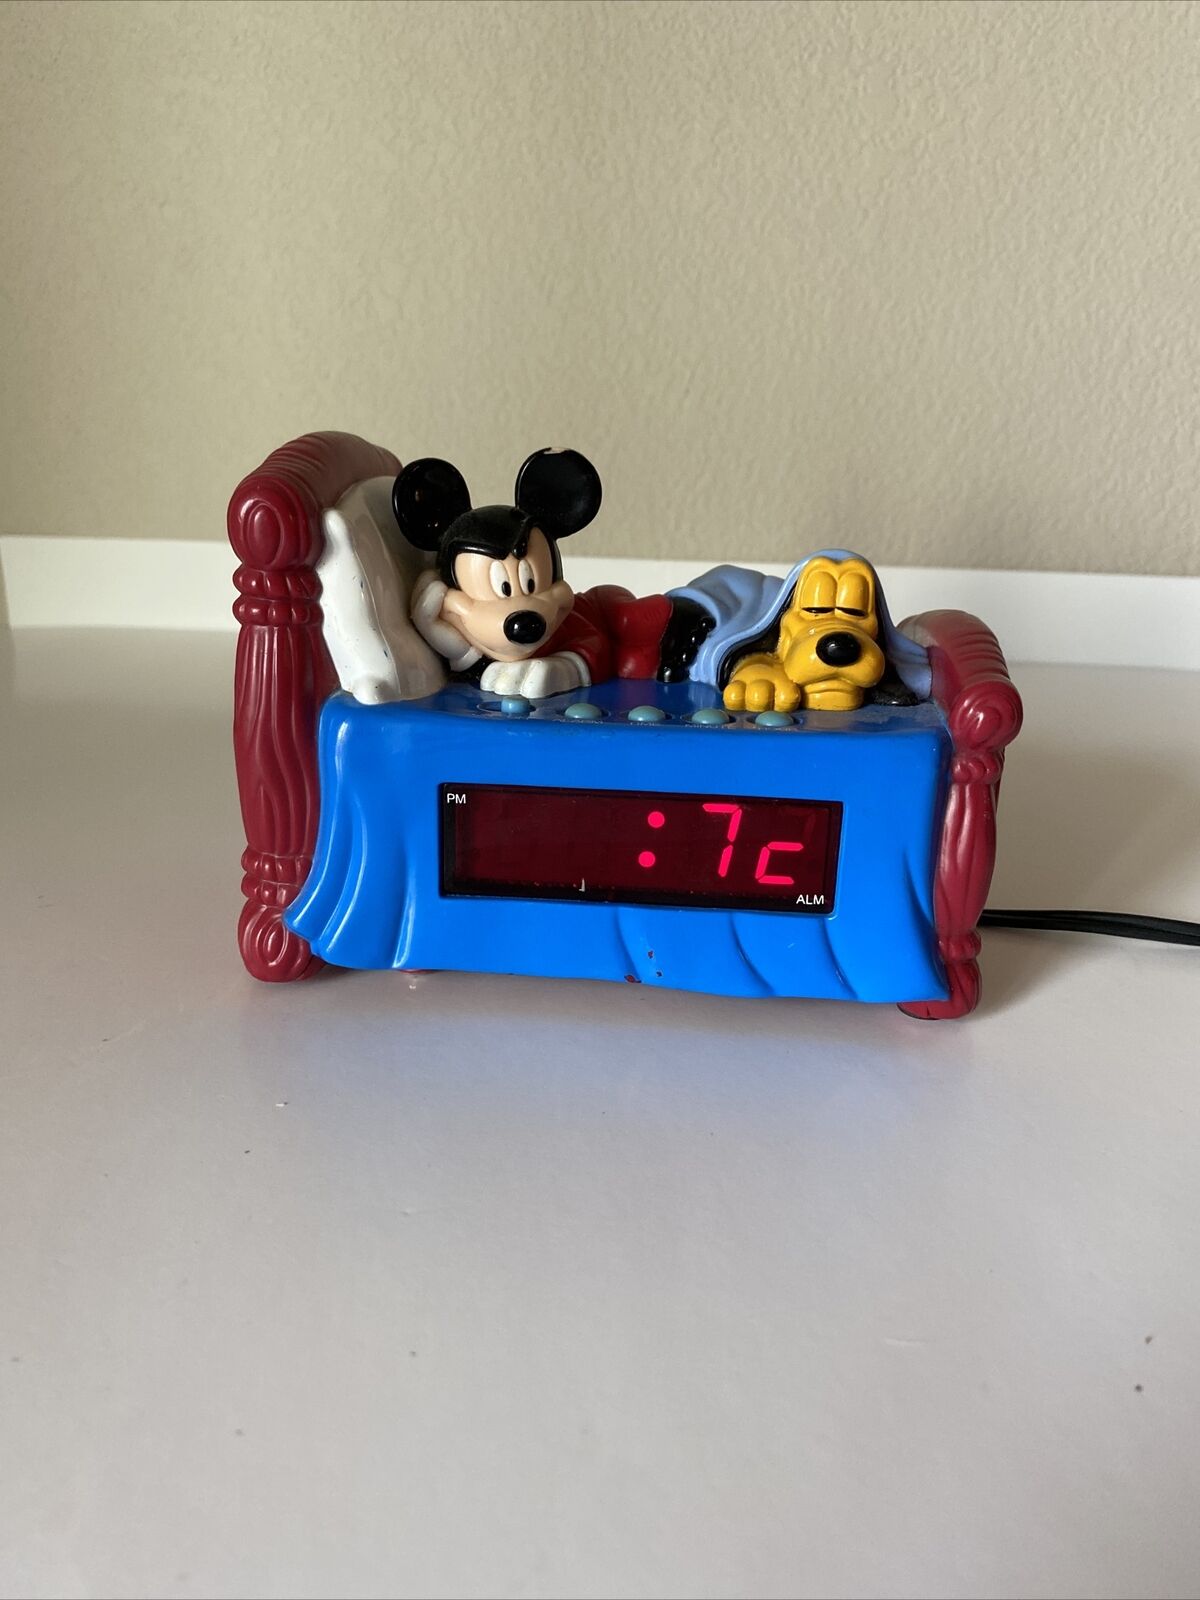 Mickey Mouse And Pluto Alarm Clock.